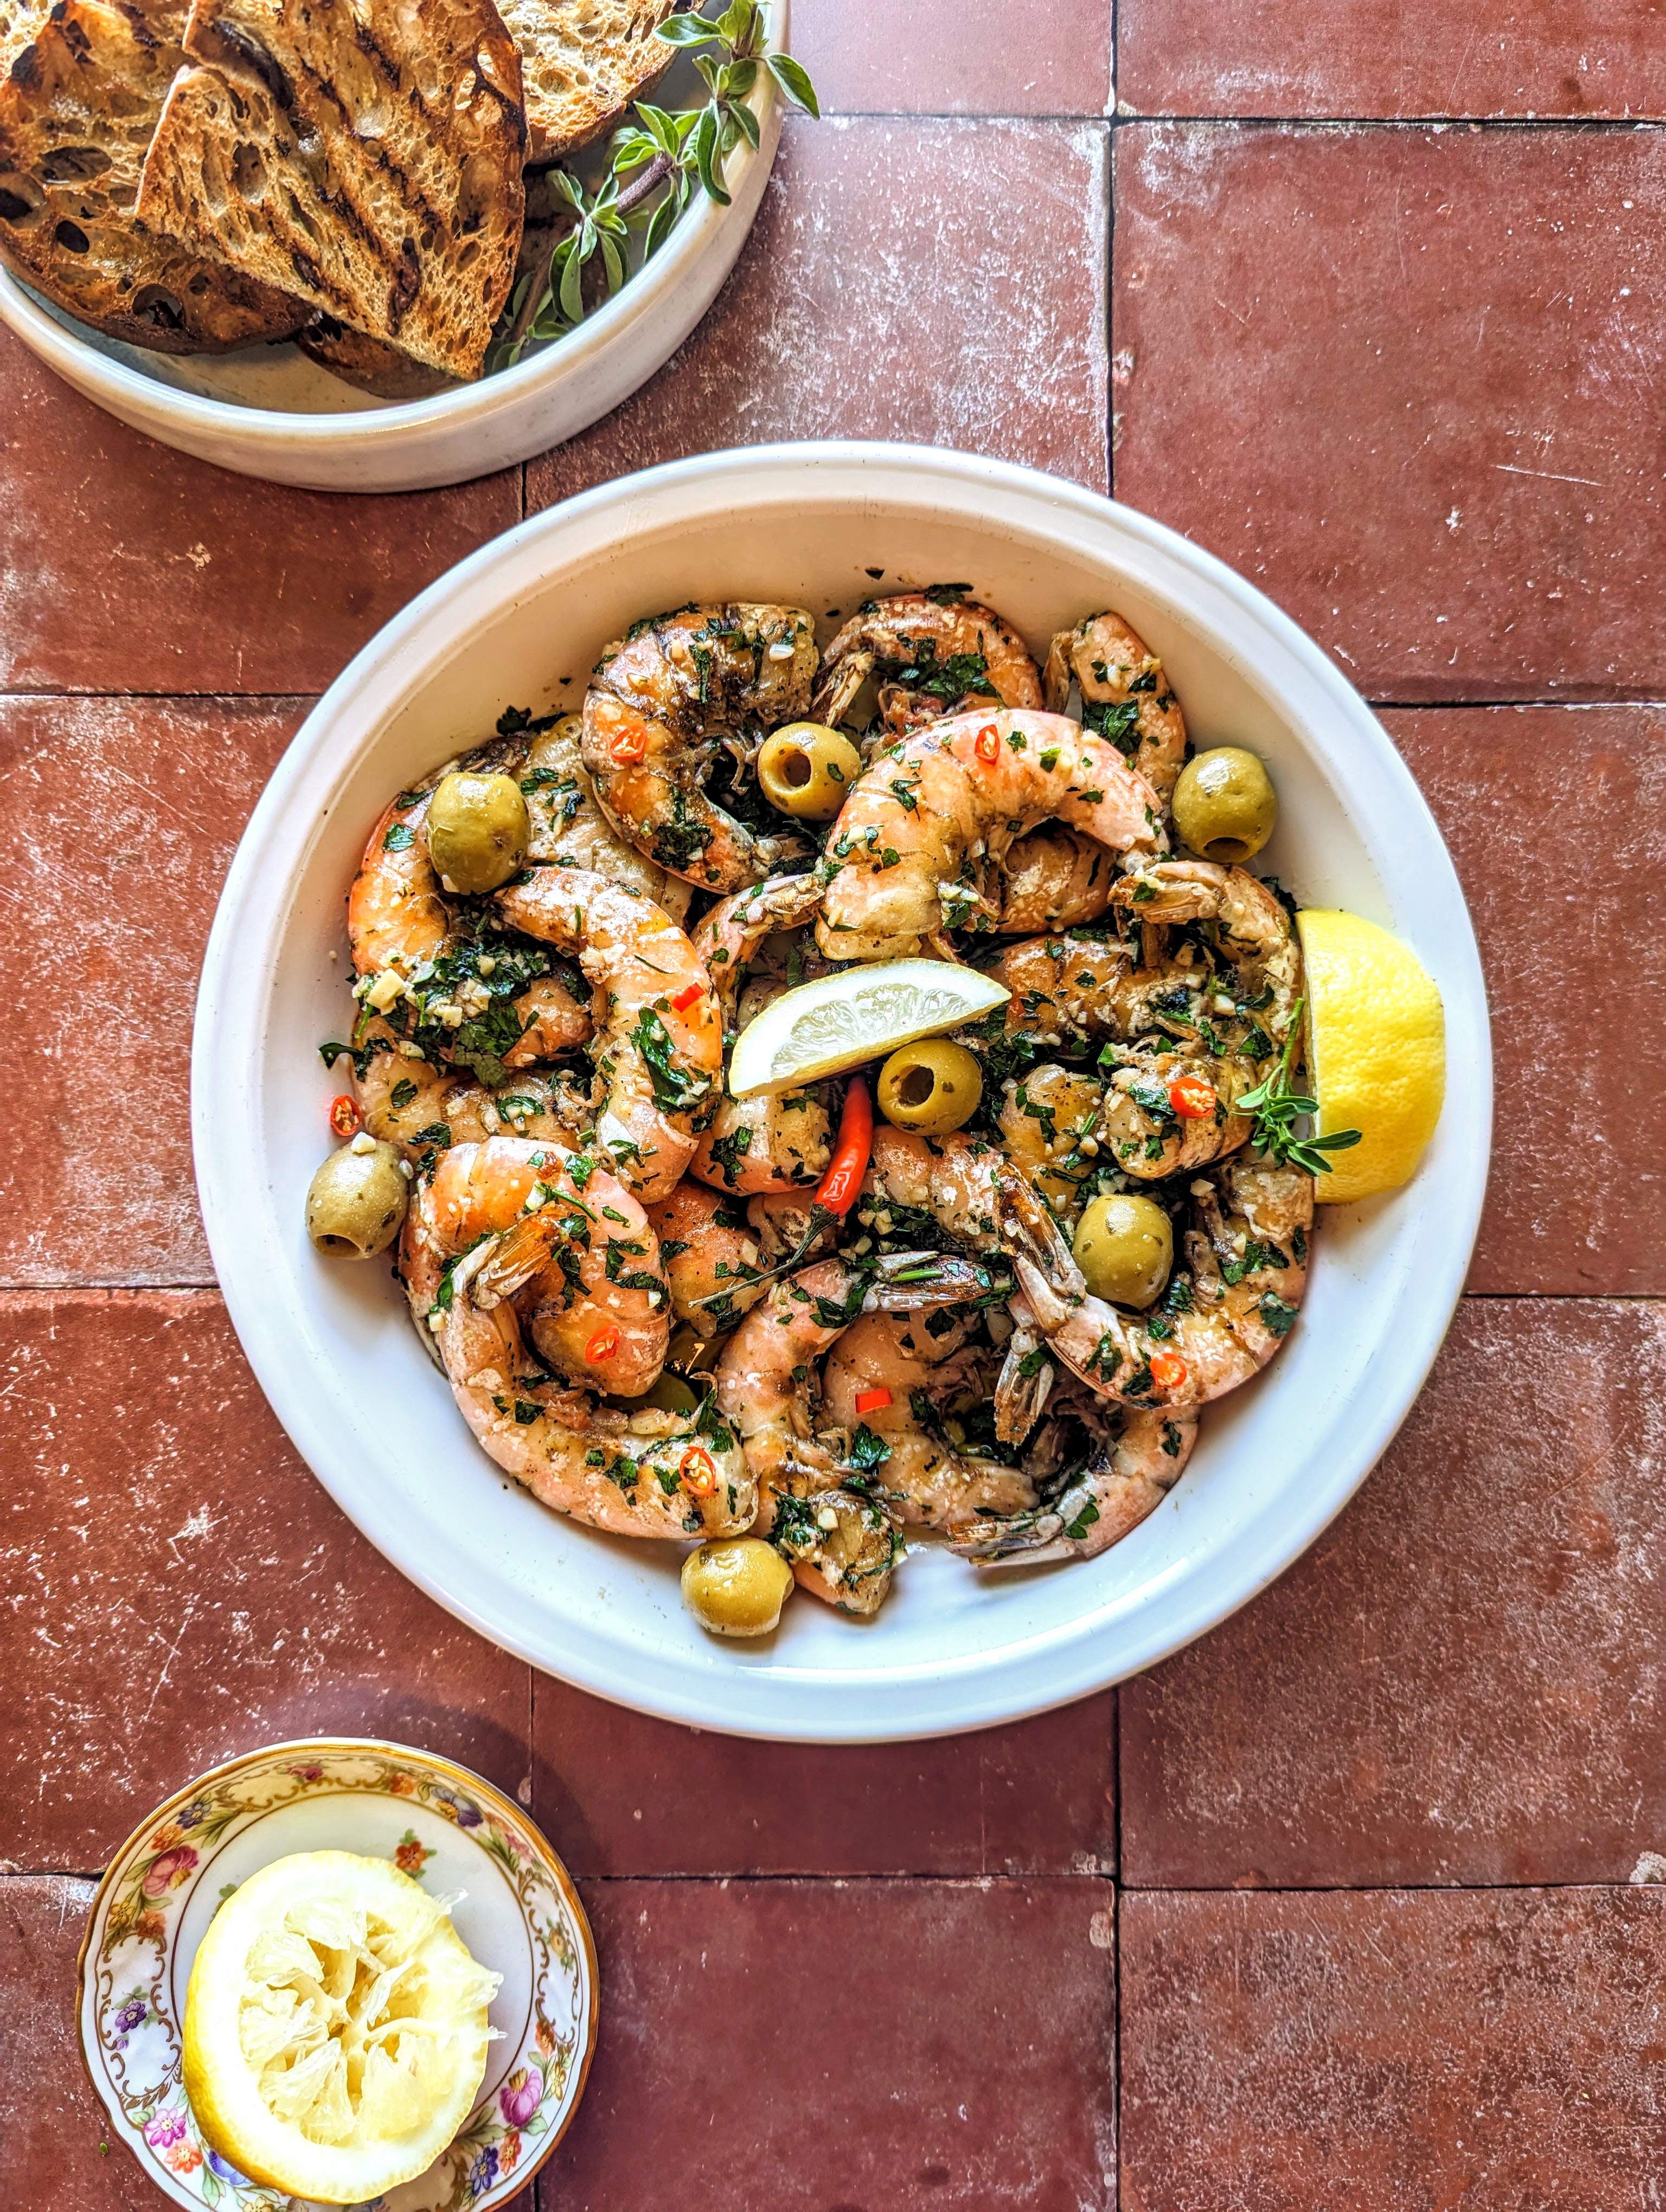 A large bowl of Grilled Garlic and Chili Shrimp with green parsley, green olived, fresh lemon wedges, and grilled sourdough toasts.